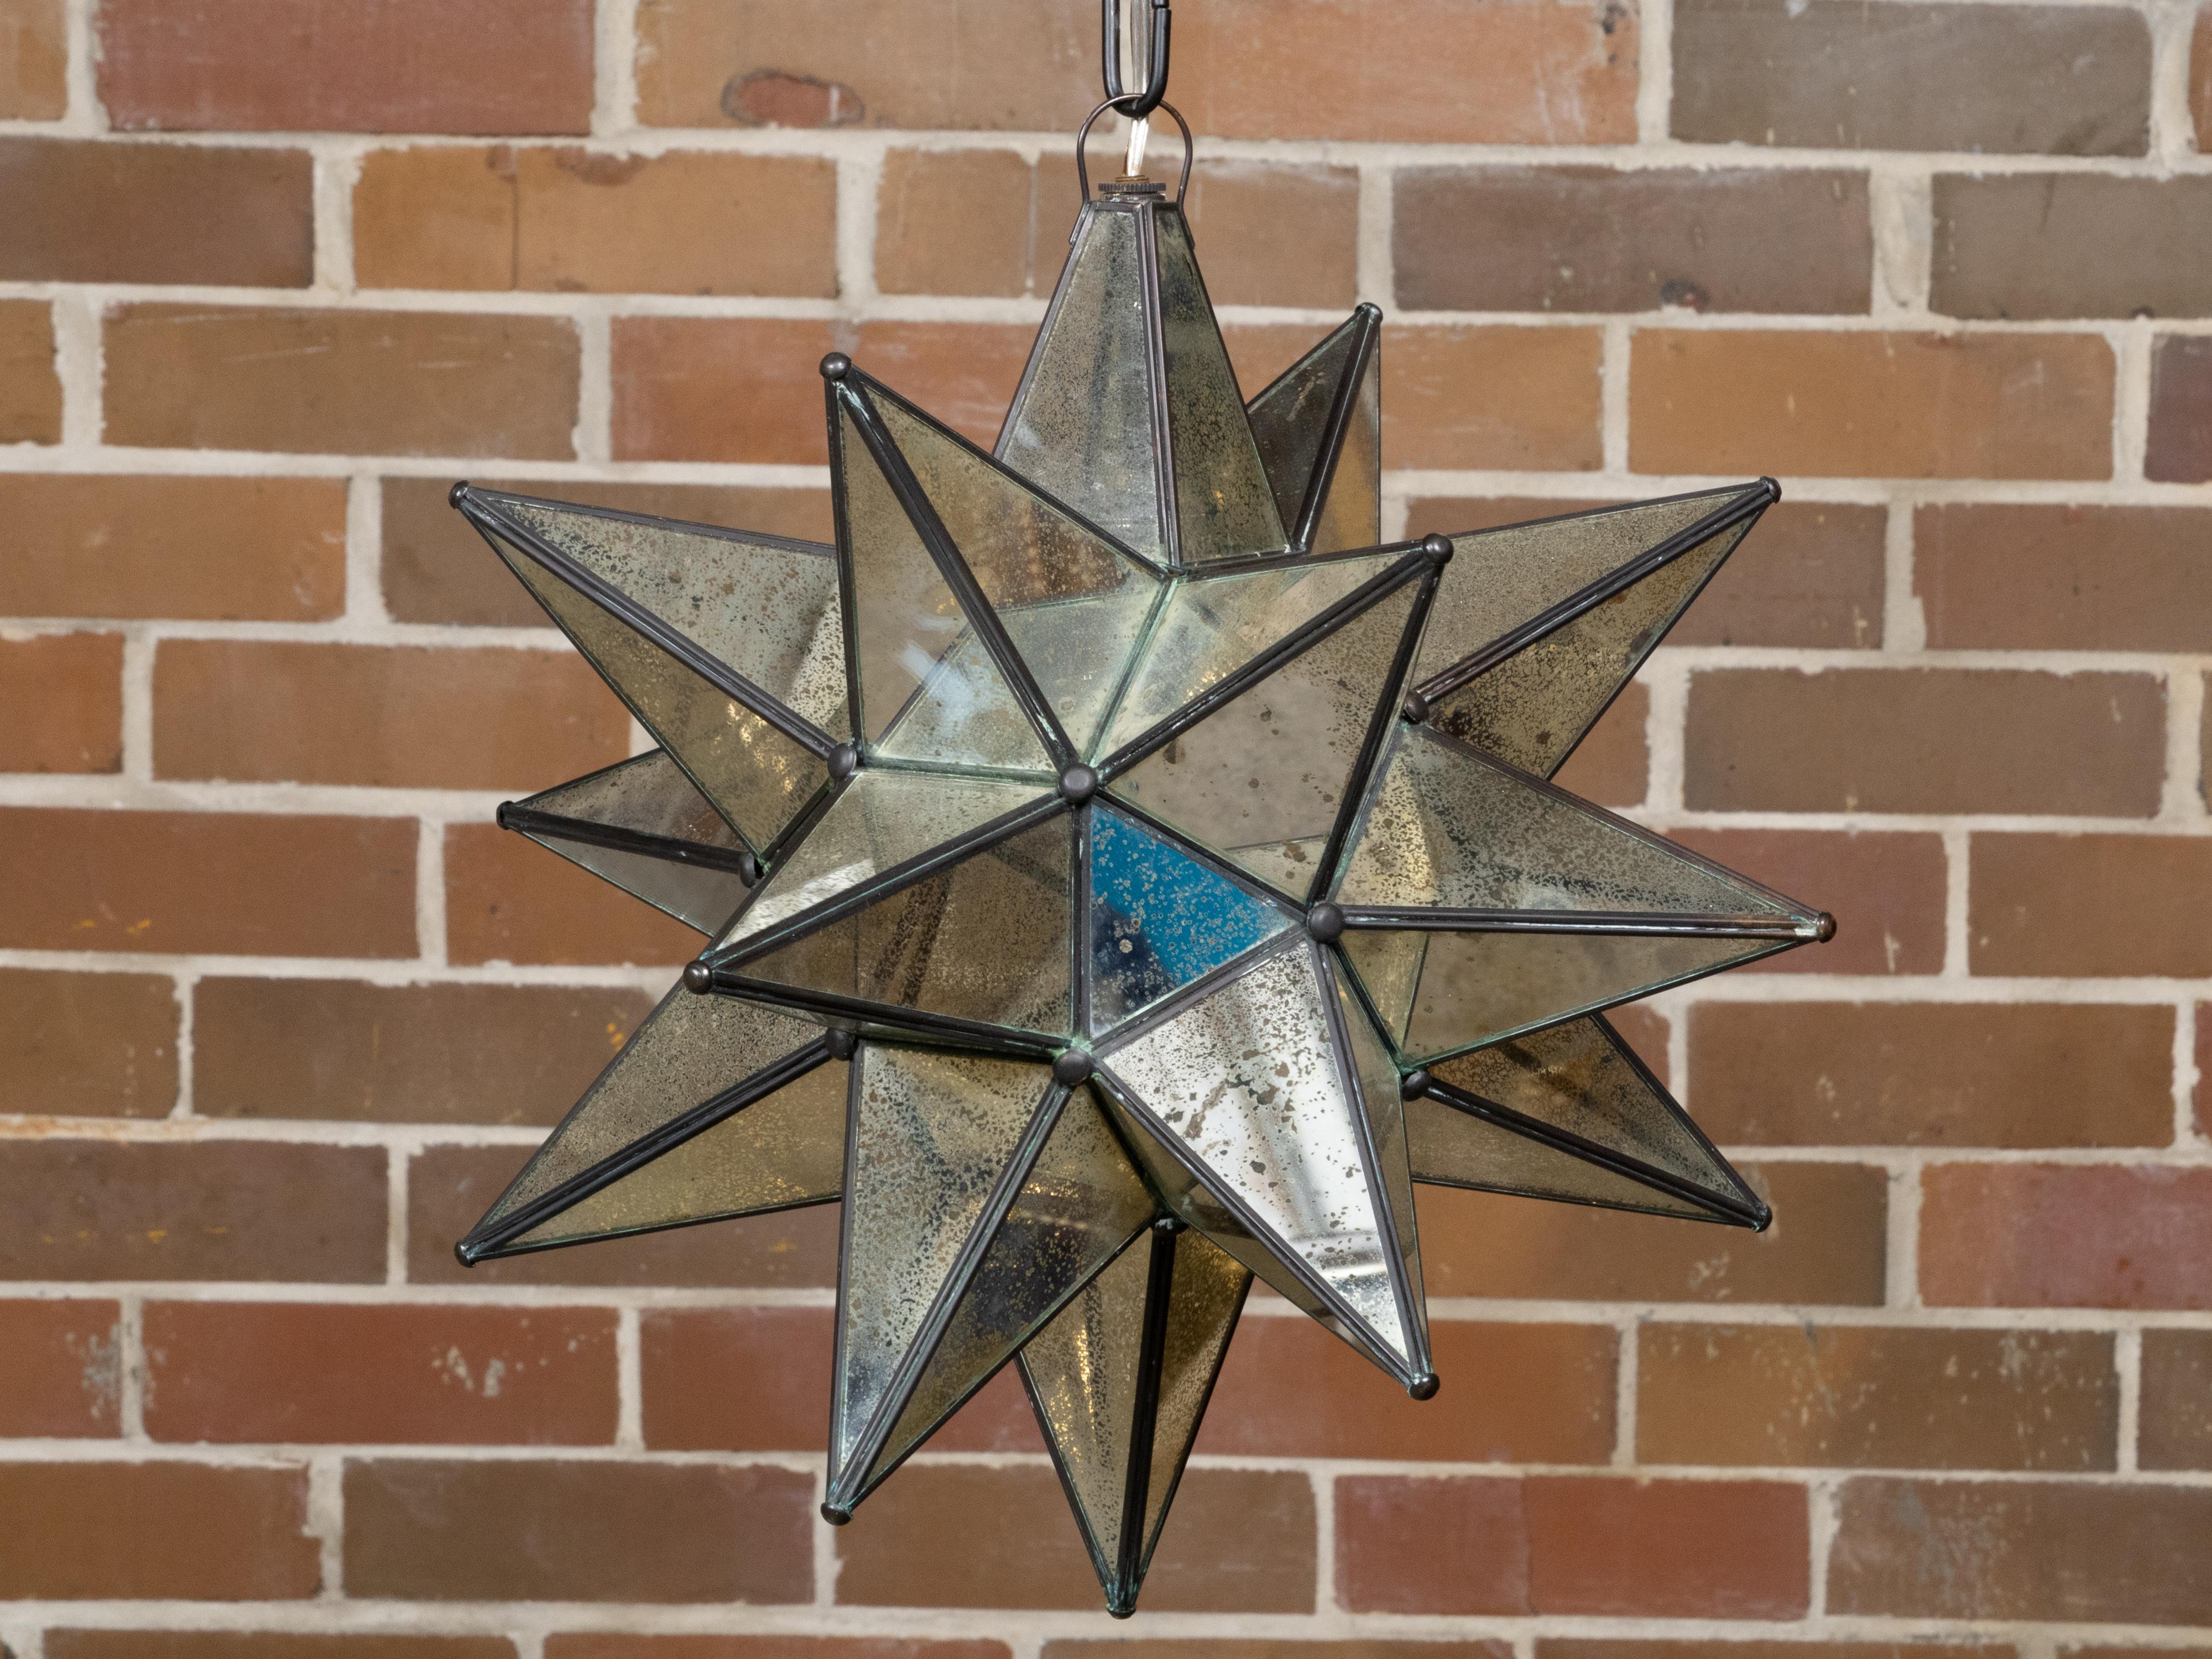 Midcentury French Star Shaped Light Fixture with Mirrored Panels, USA Wired In Good Condition For Sale In Atlanta, GA